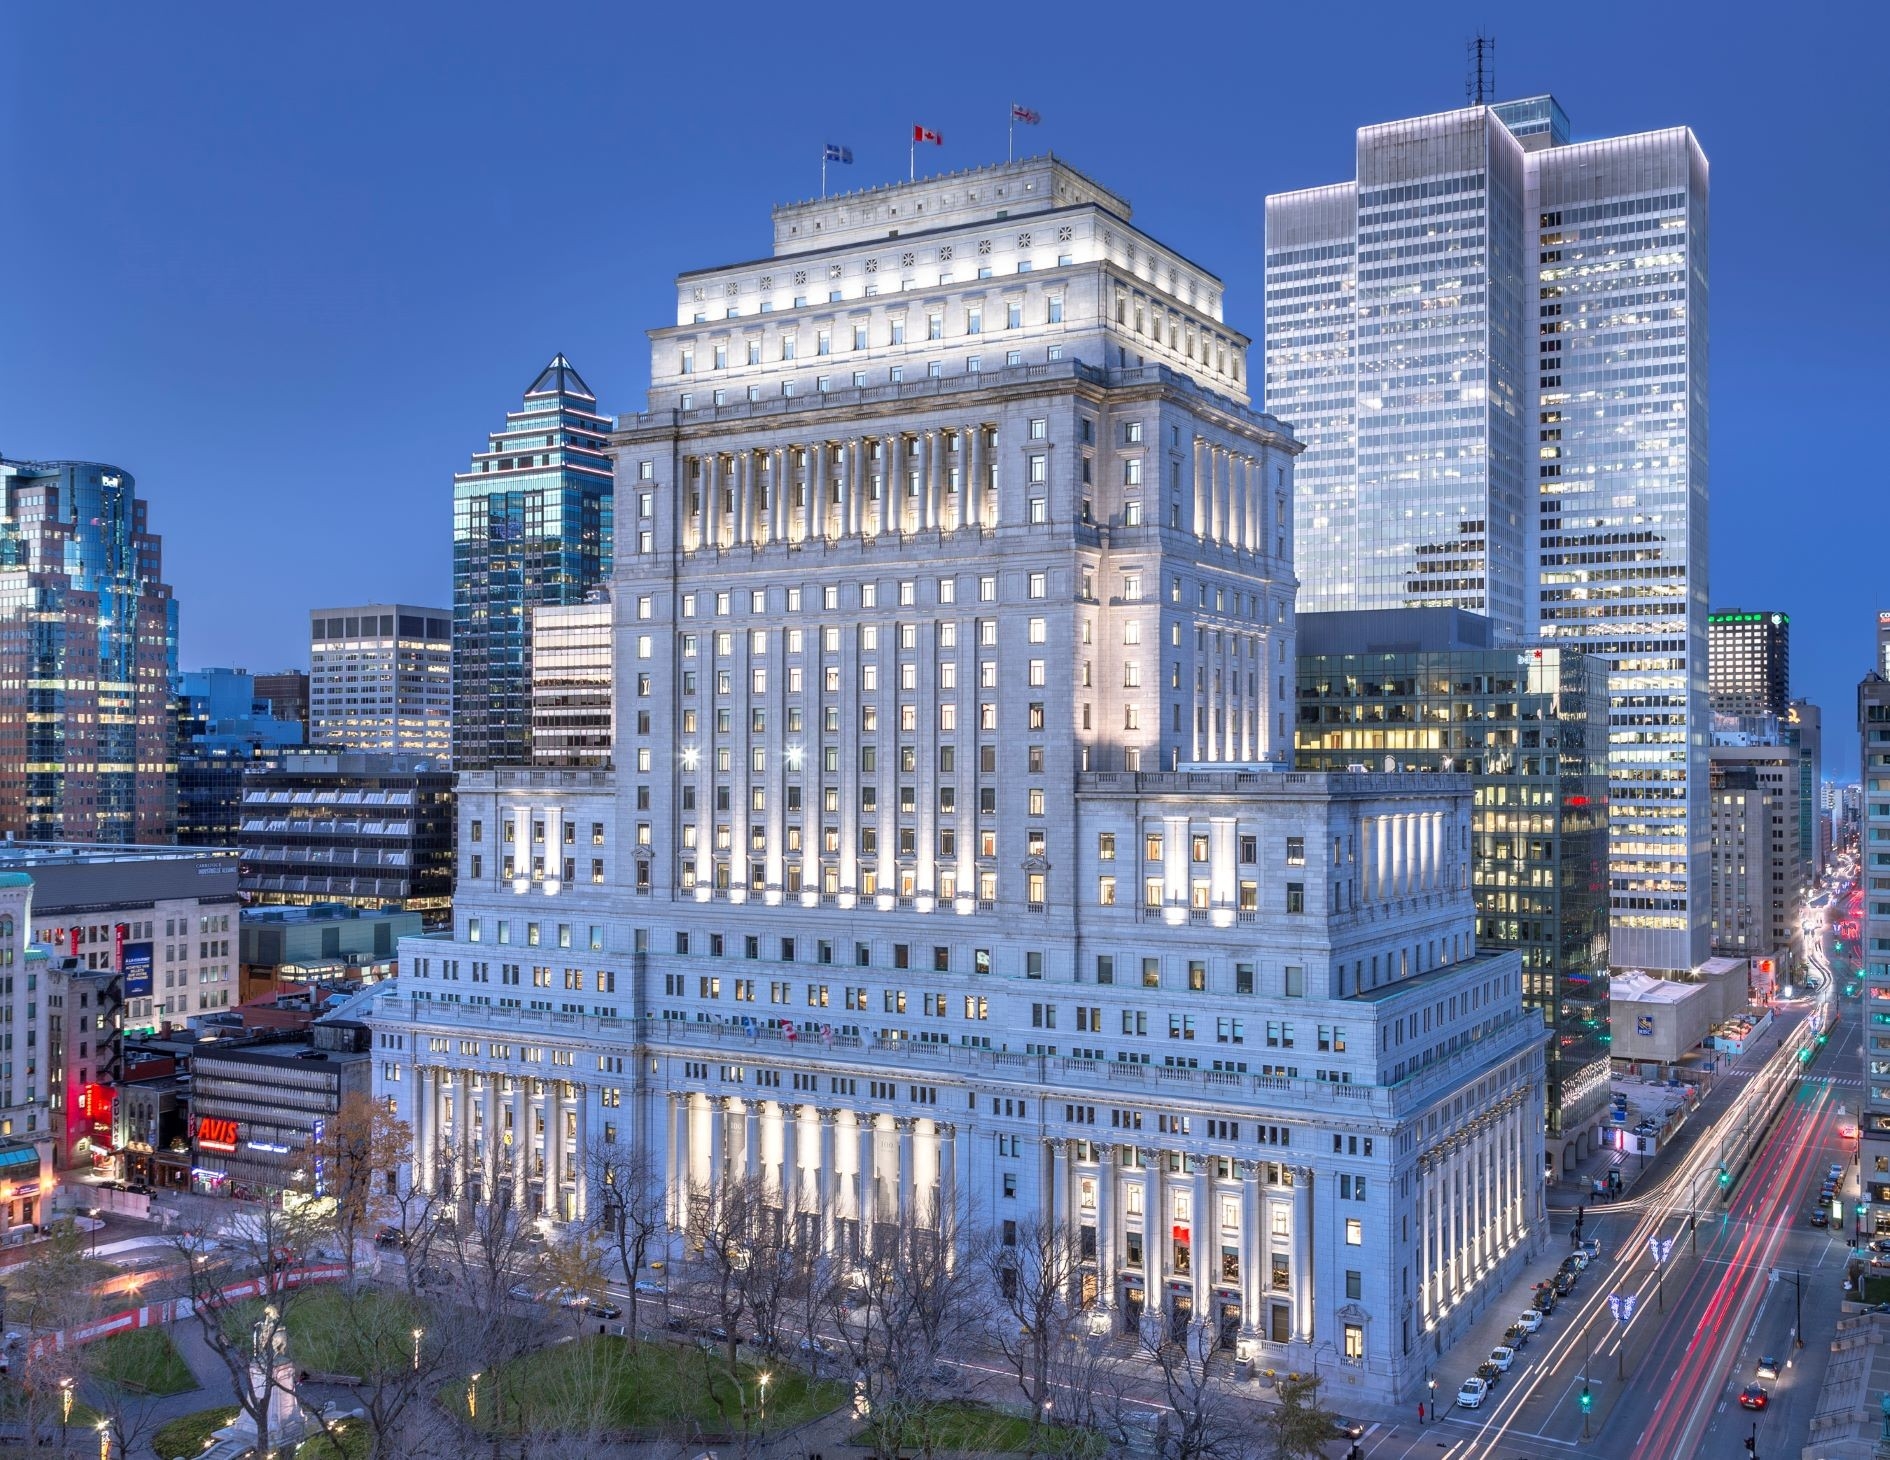 Aerial photograph capturing the Sun Life Building in Montreal at dusk. The building stands out with its grand, historical architecture amidst the modern cityscape, showcasing a blend of classic and contemporary structures.